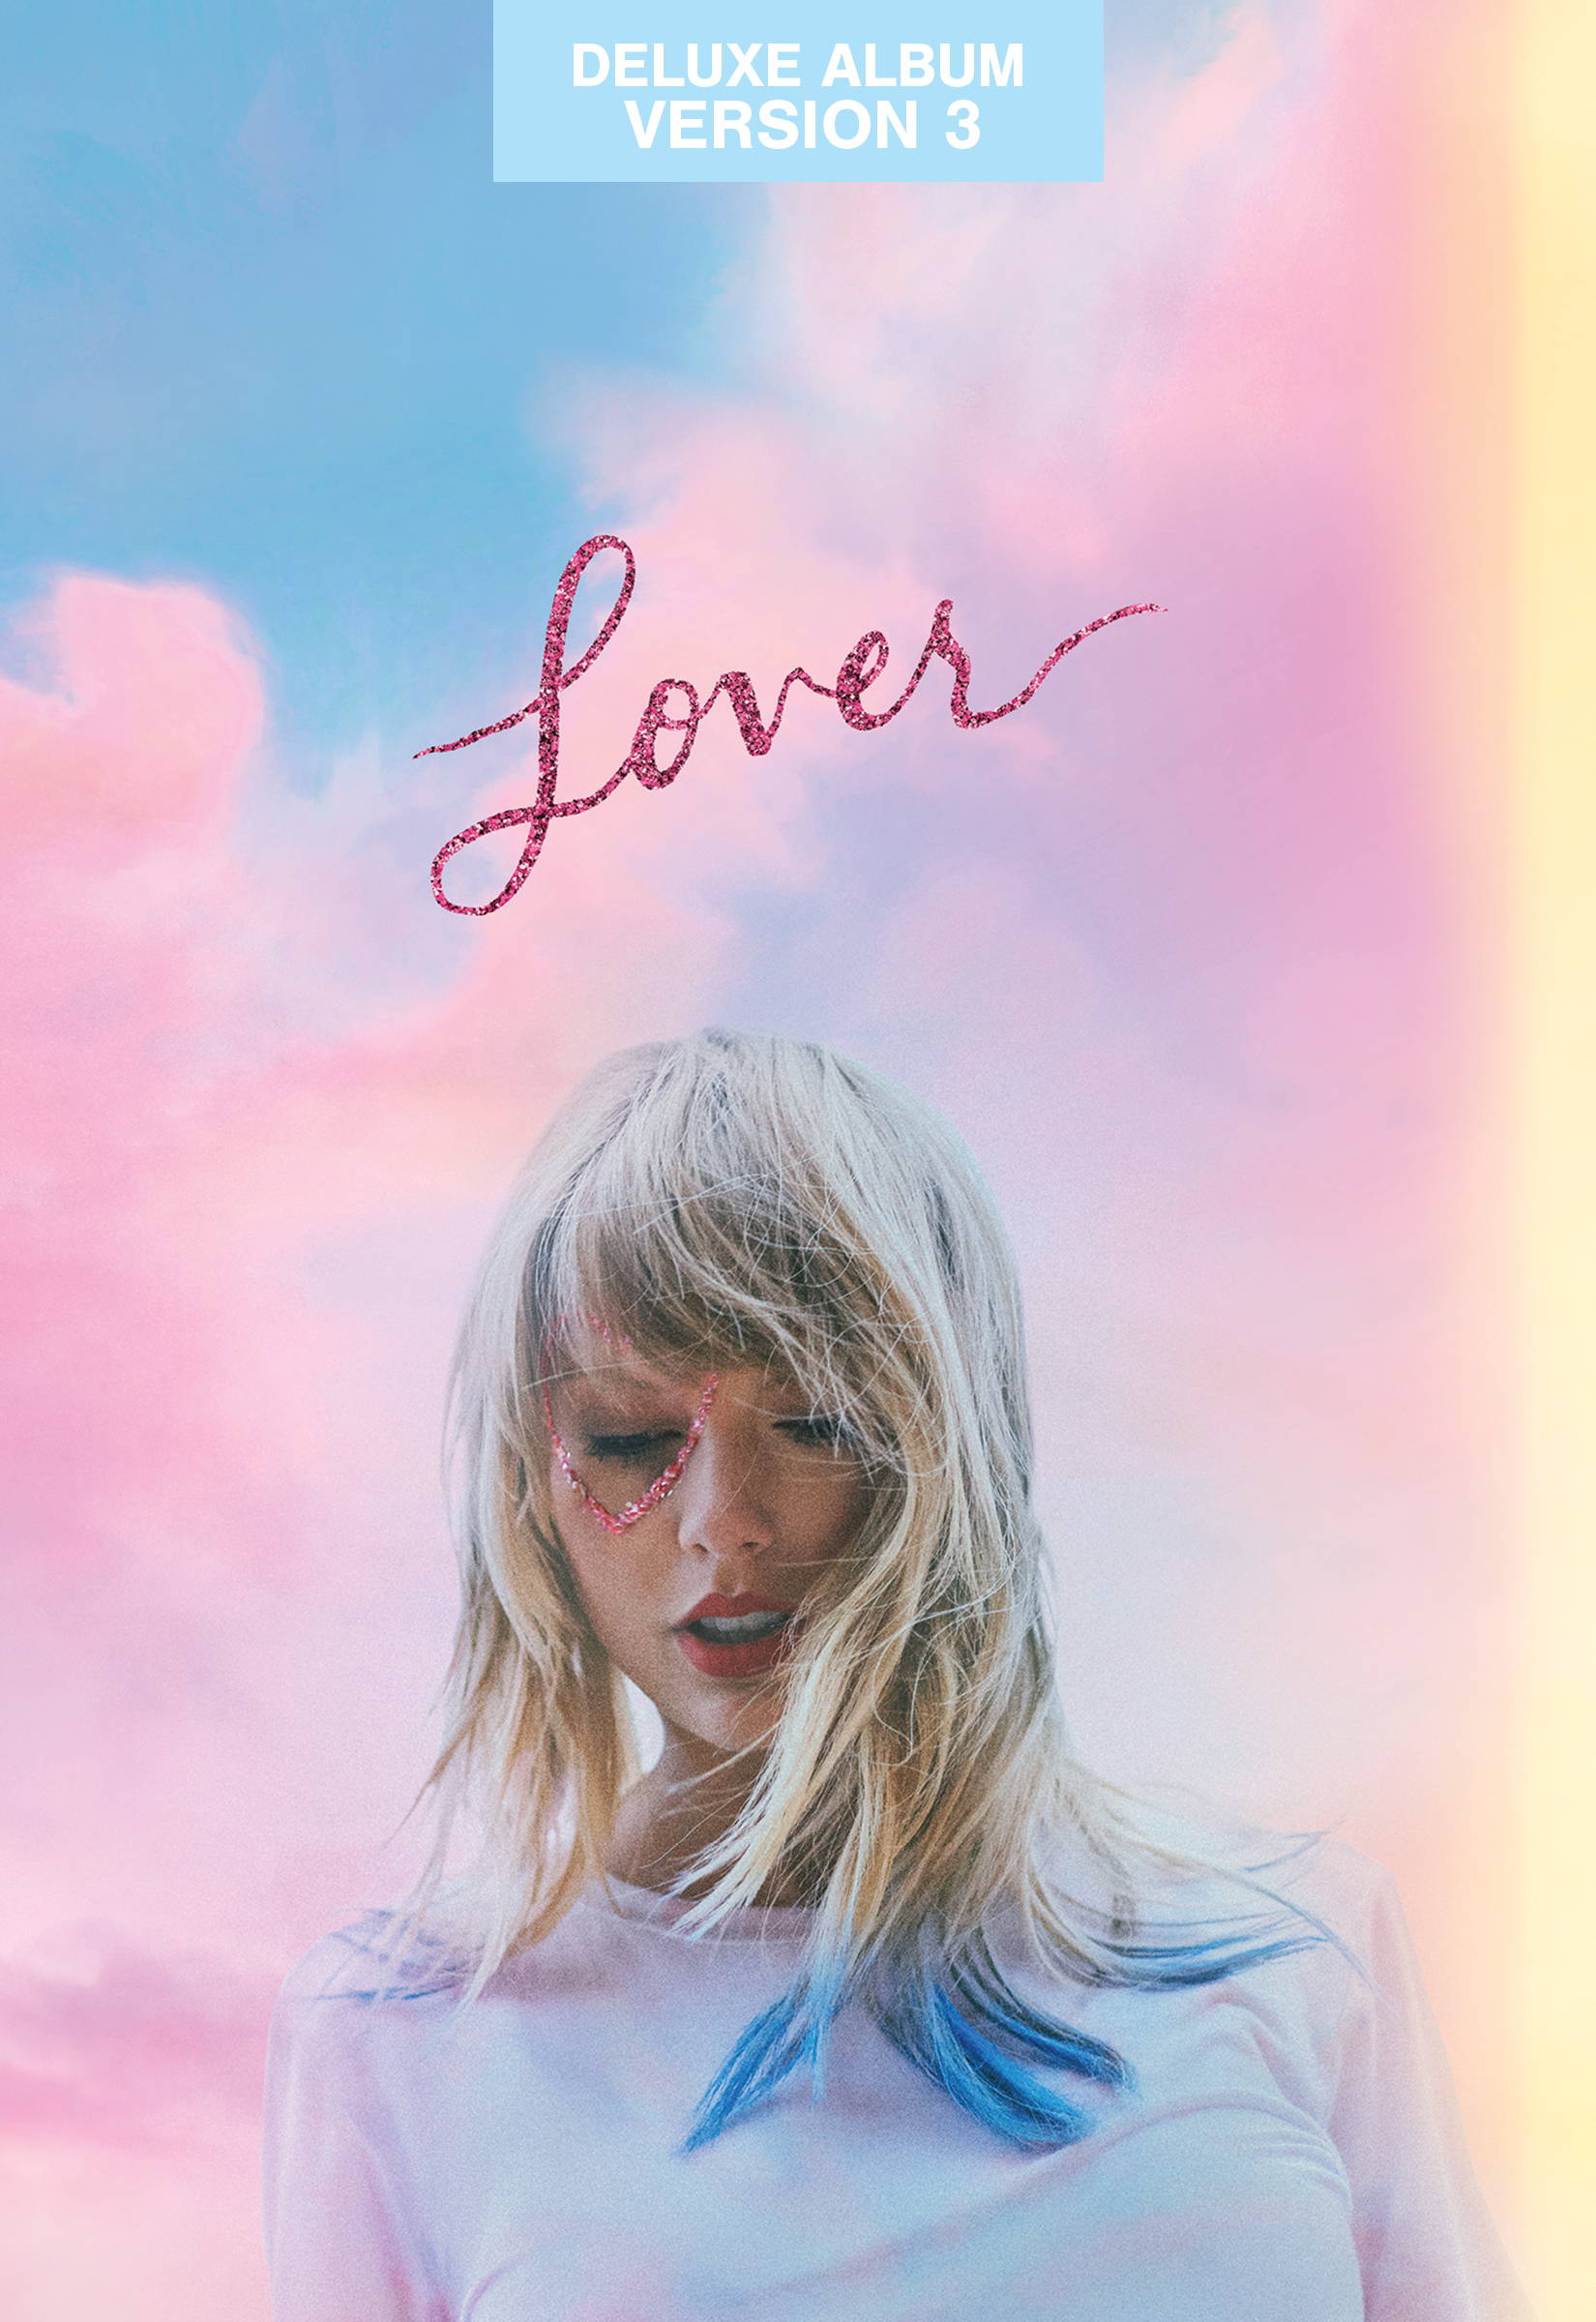 Deluxe Version 3 of Taylor Swift's new album Lover